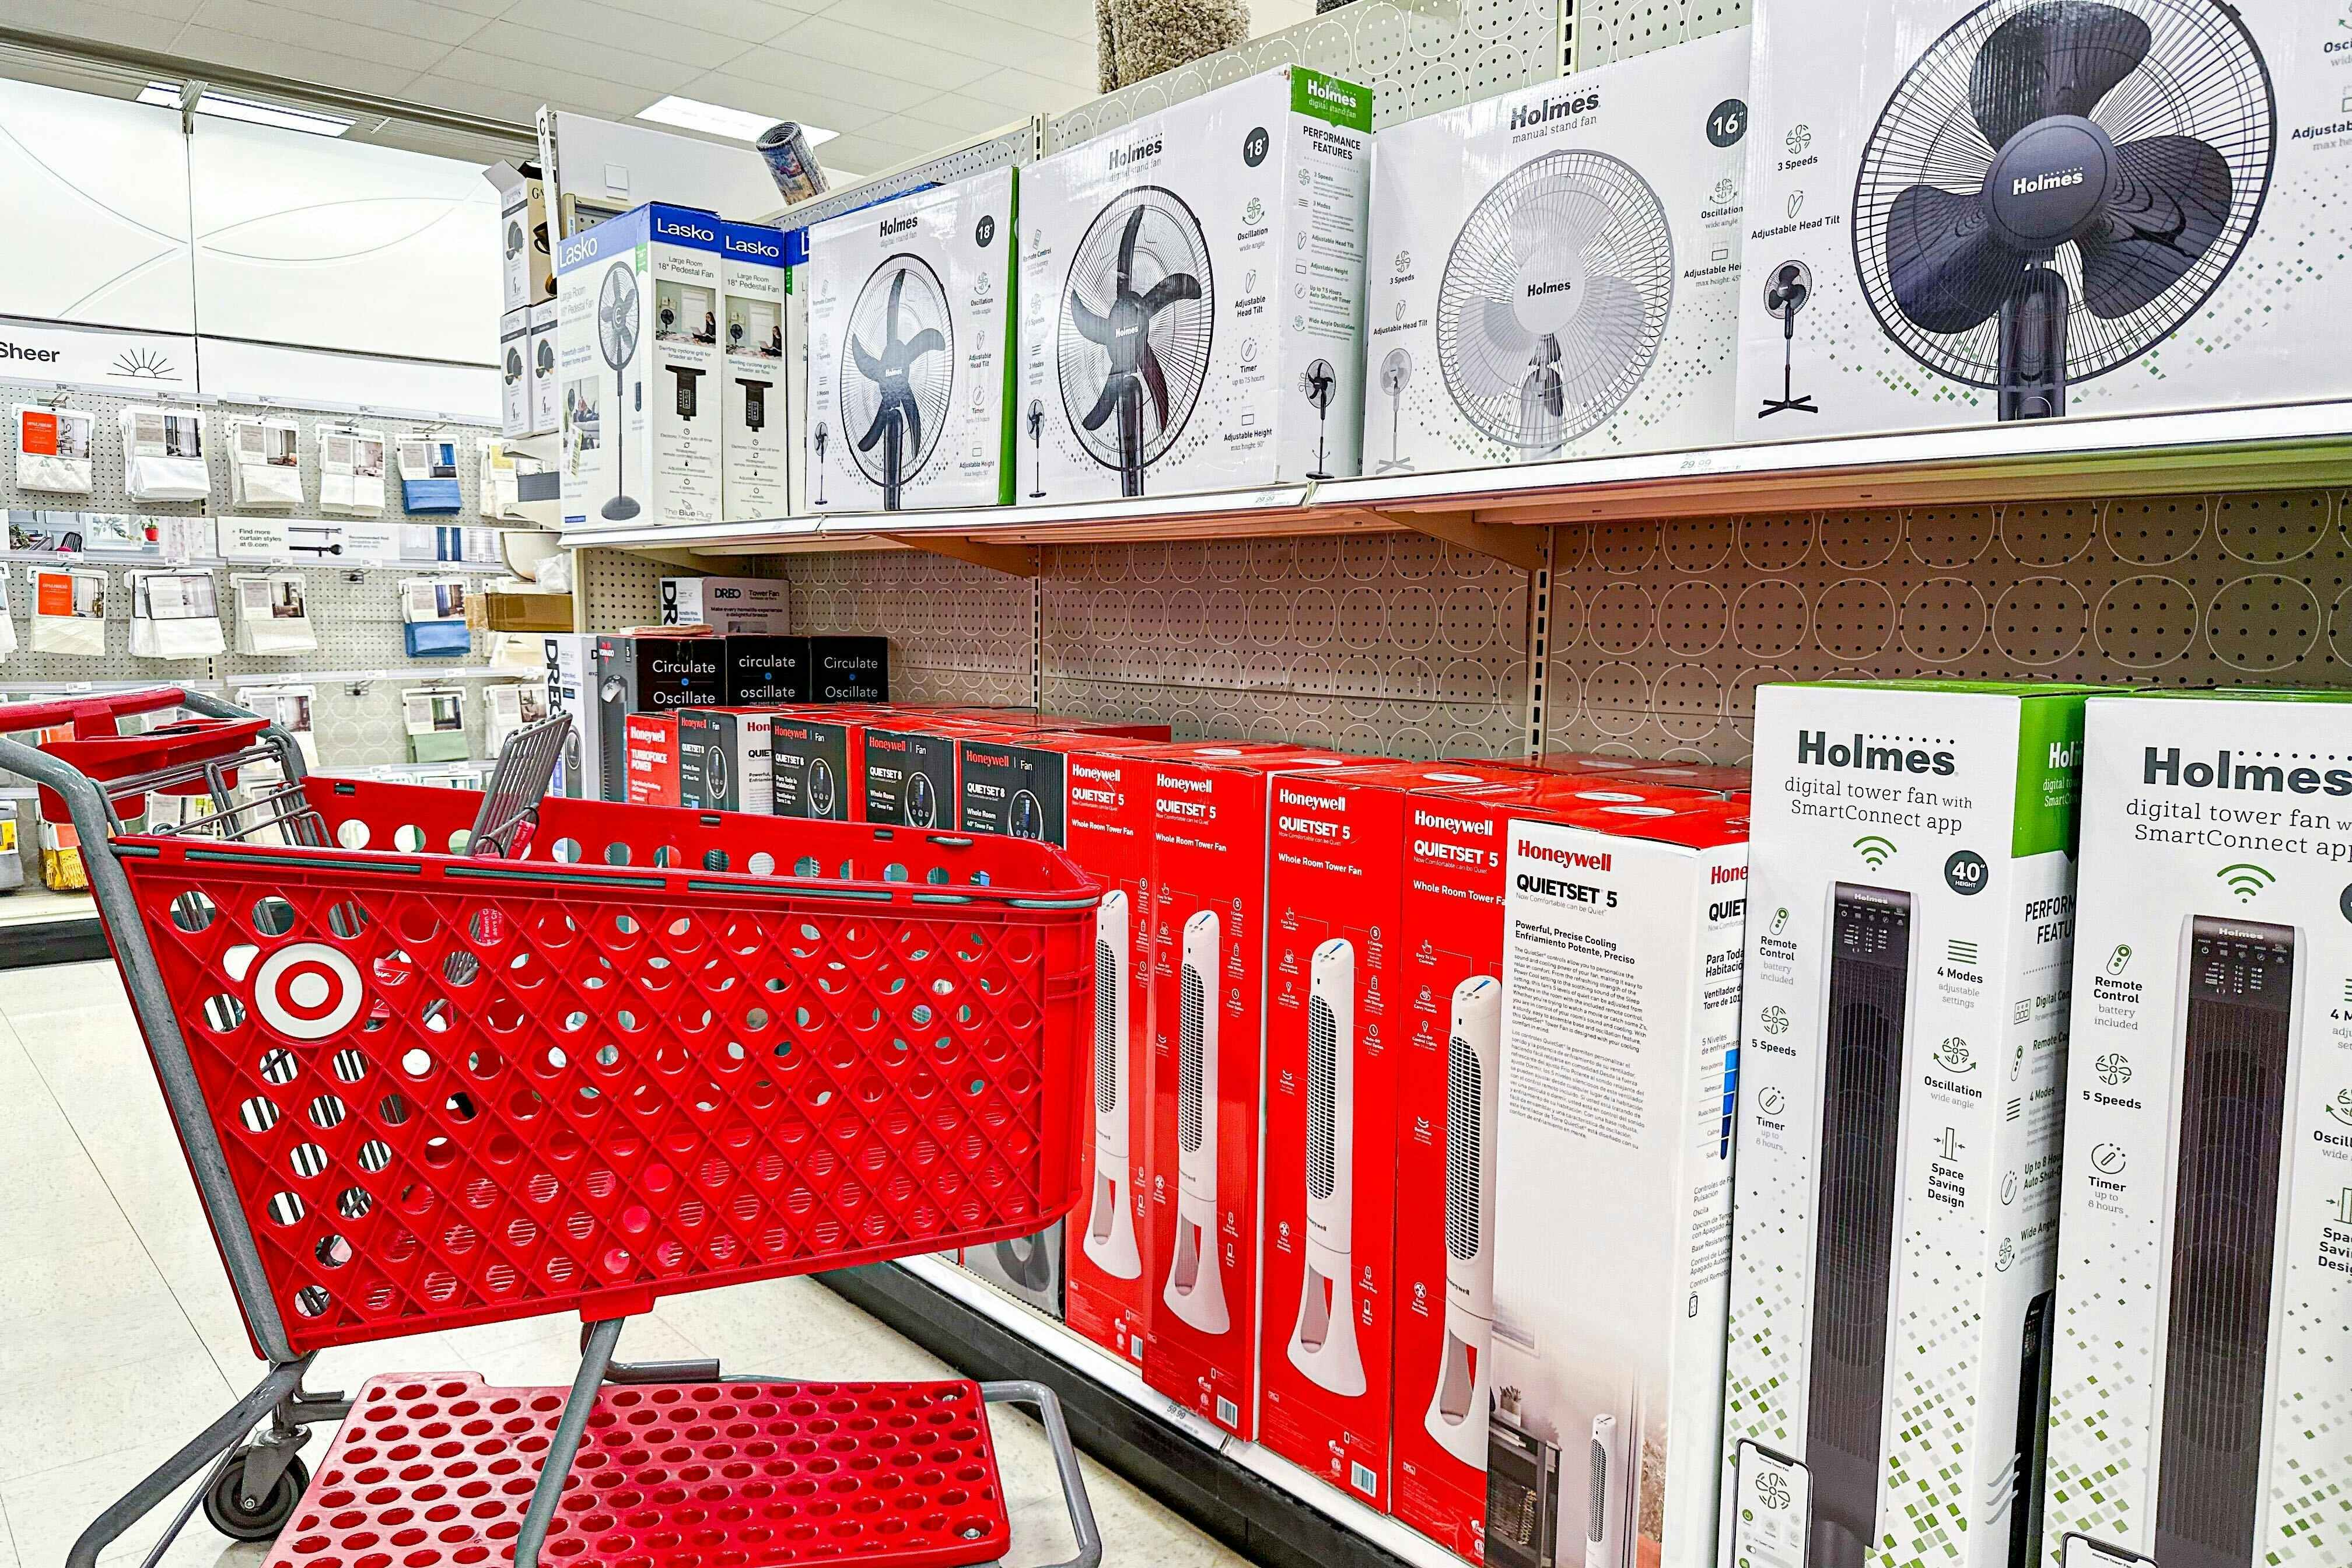 Get Fans for as Low as $6.07 at Target